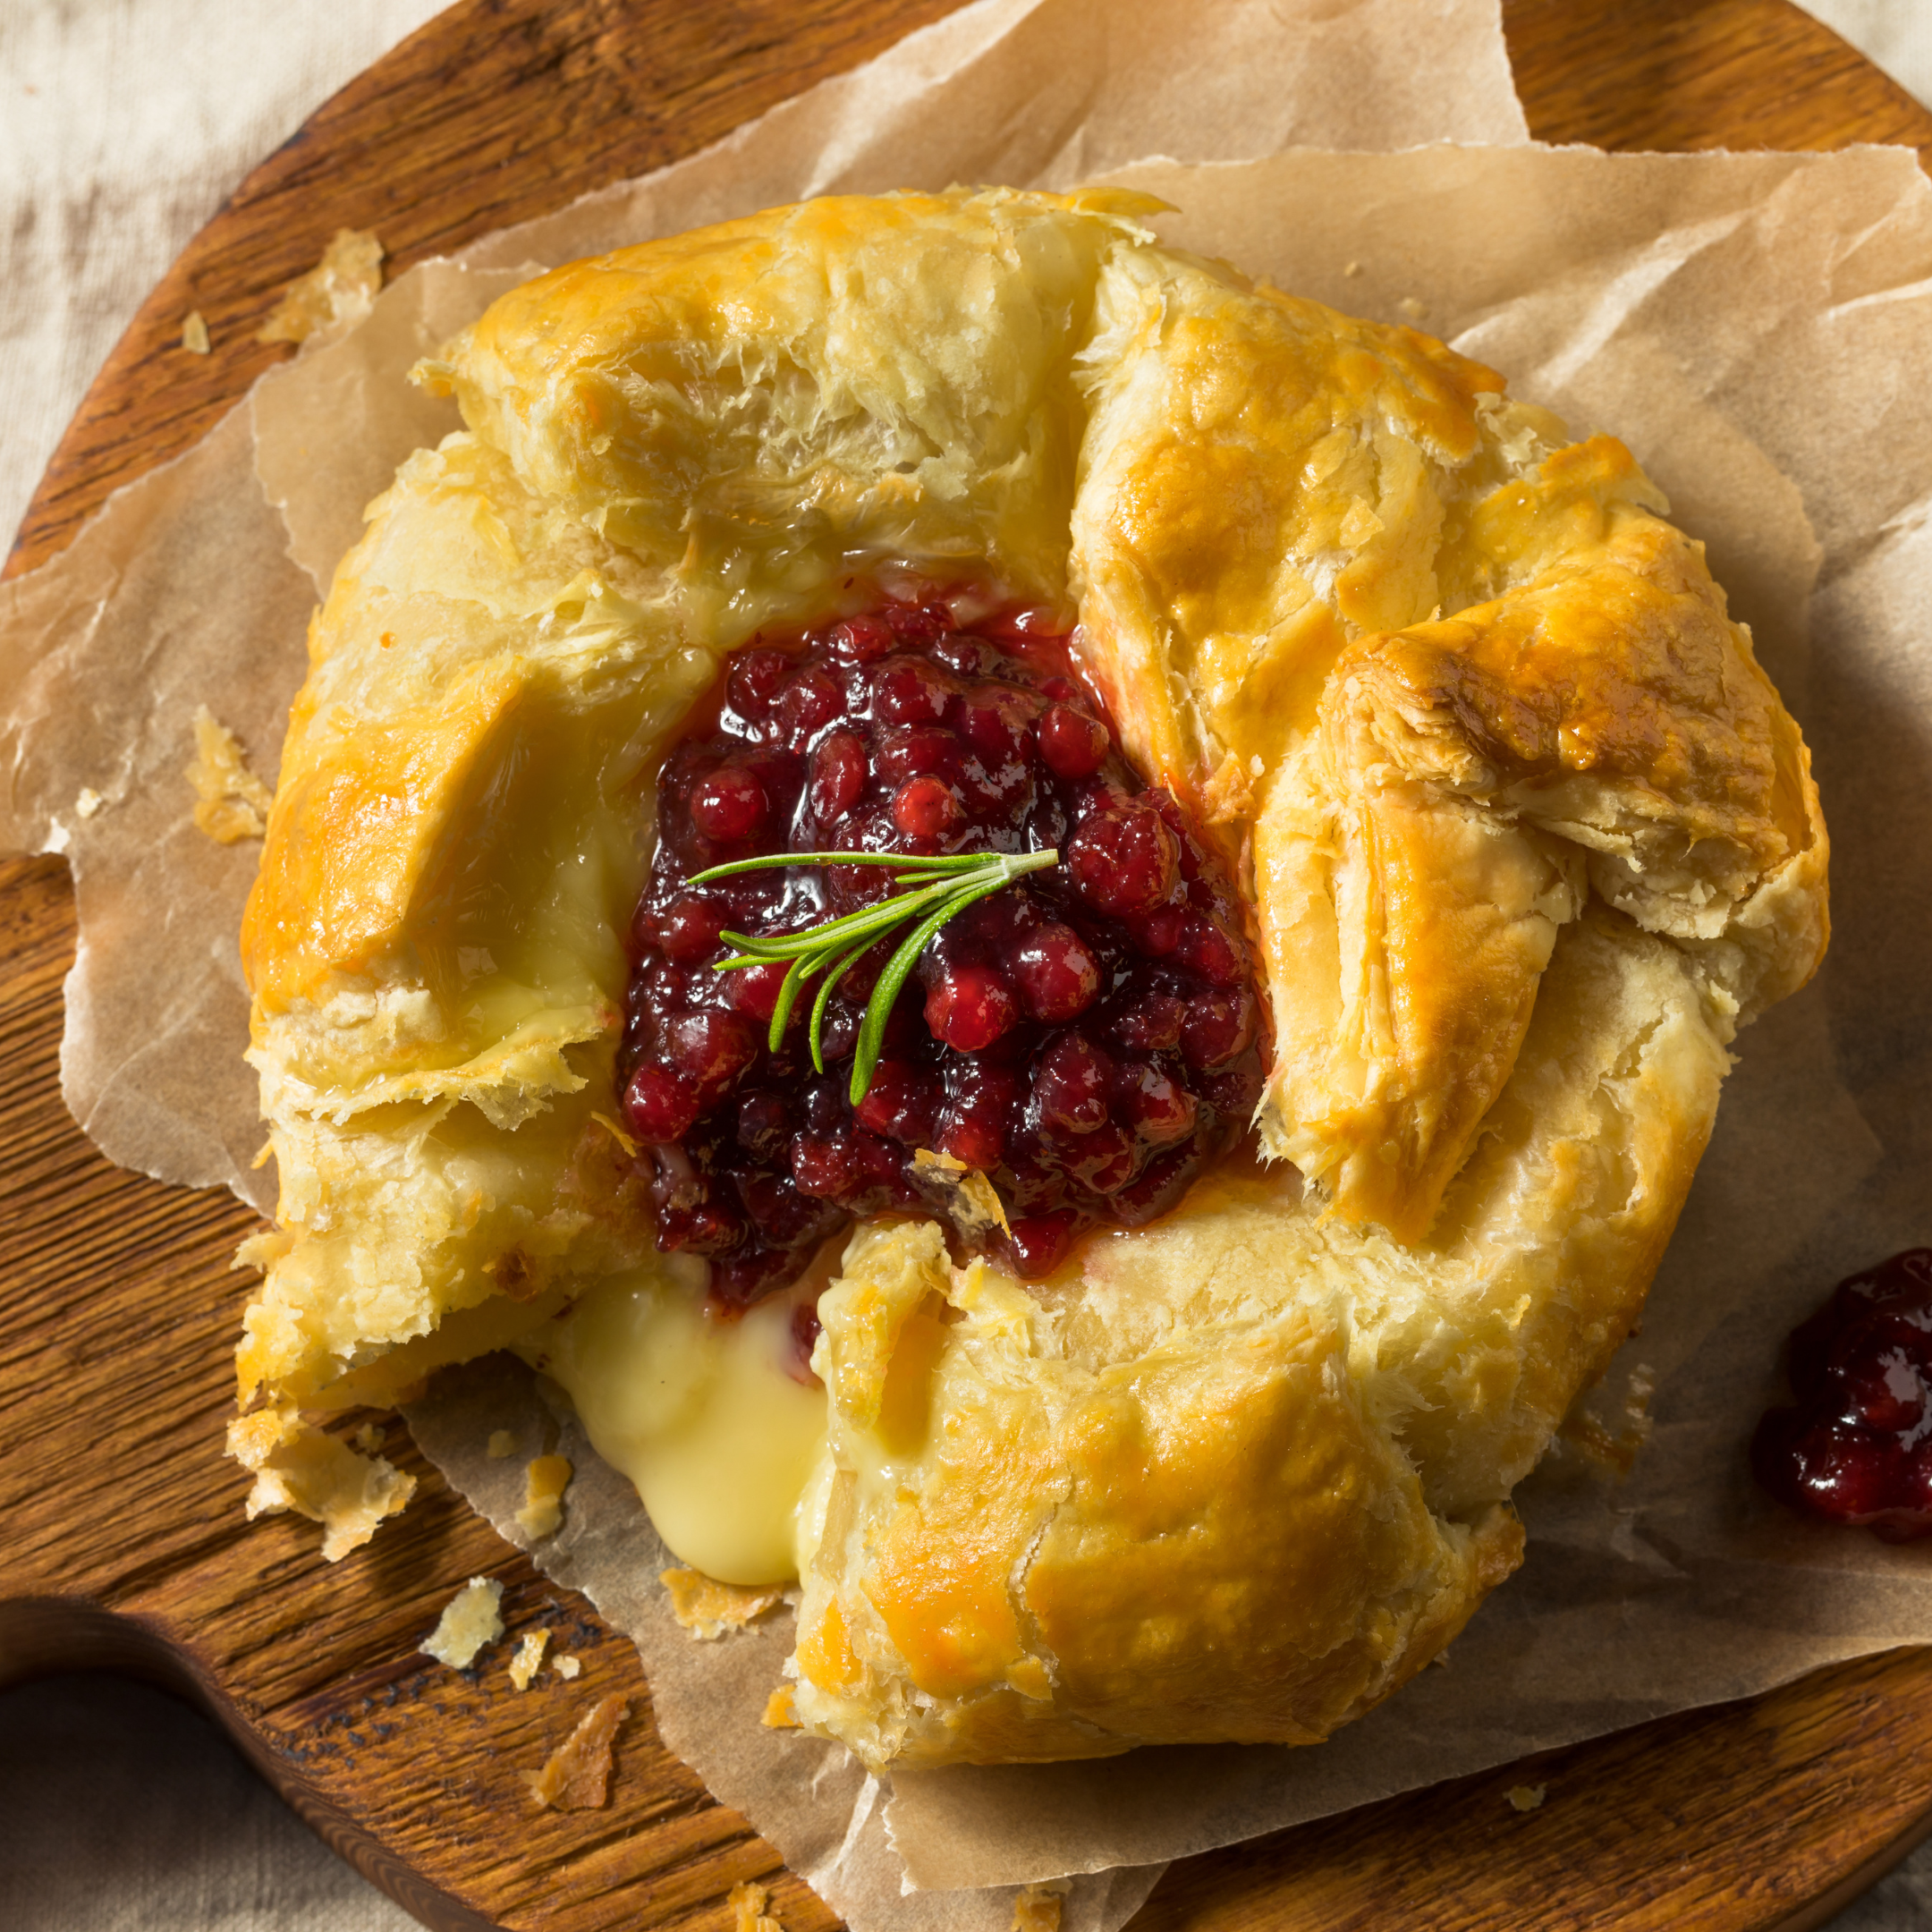 Irresistible Baked Brie & Cranberry Puff Pastry with Mushed by YOU Cranberry Chutney